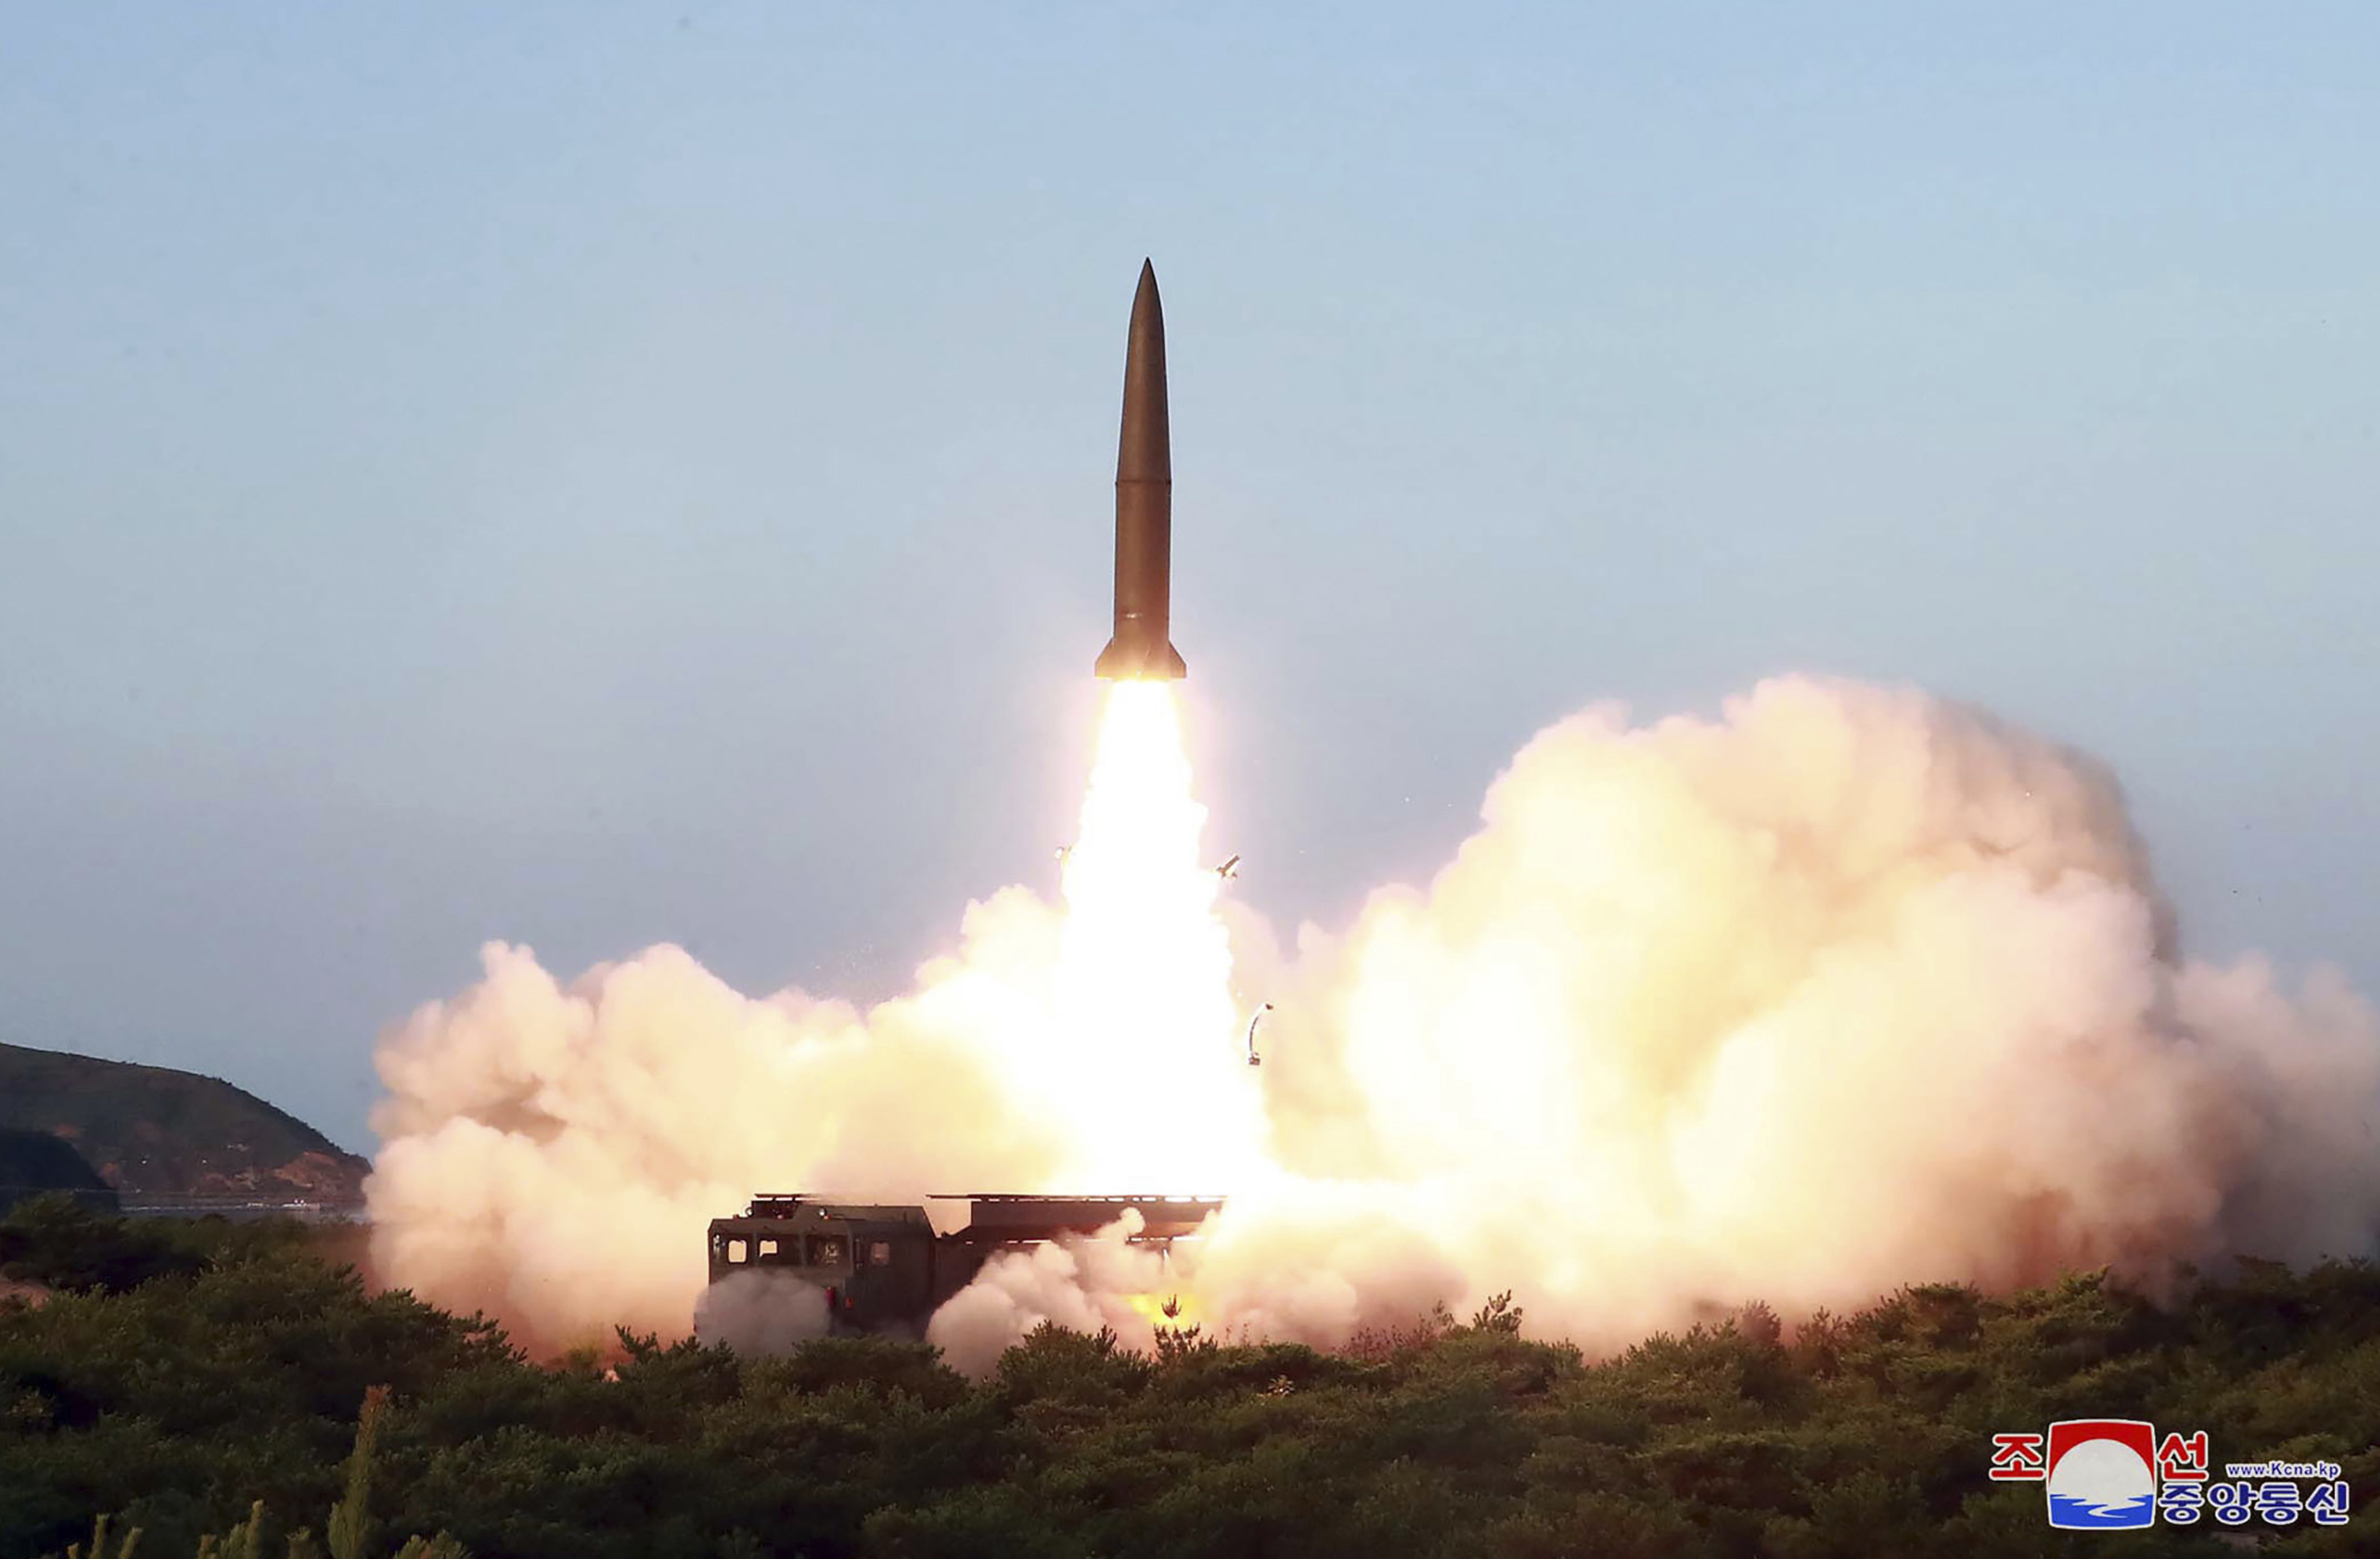 This Thursday, July 25, 2019, photo provided on Friday, July 26, 2019, by the North Korean government shows a test of a missile launch in North Korea. A day after two North Korean missile launches rattled Asia, the nation announced Friday that its leader Kim Jong Un supervised a test of a new-type tactical guided weapon that was meant to be a 